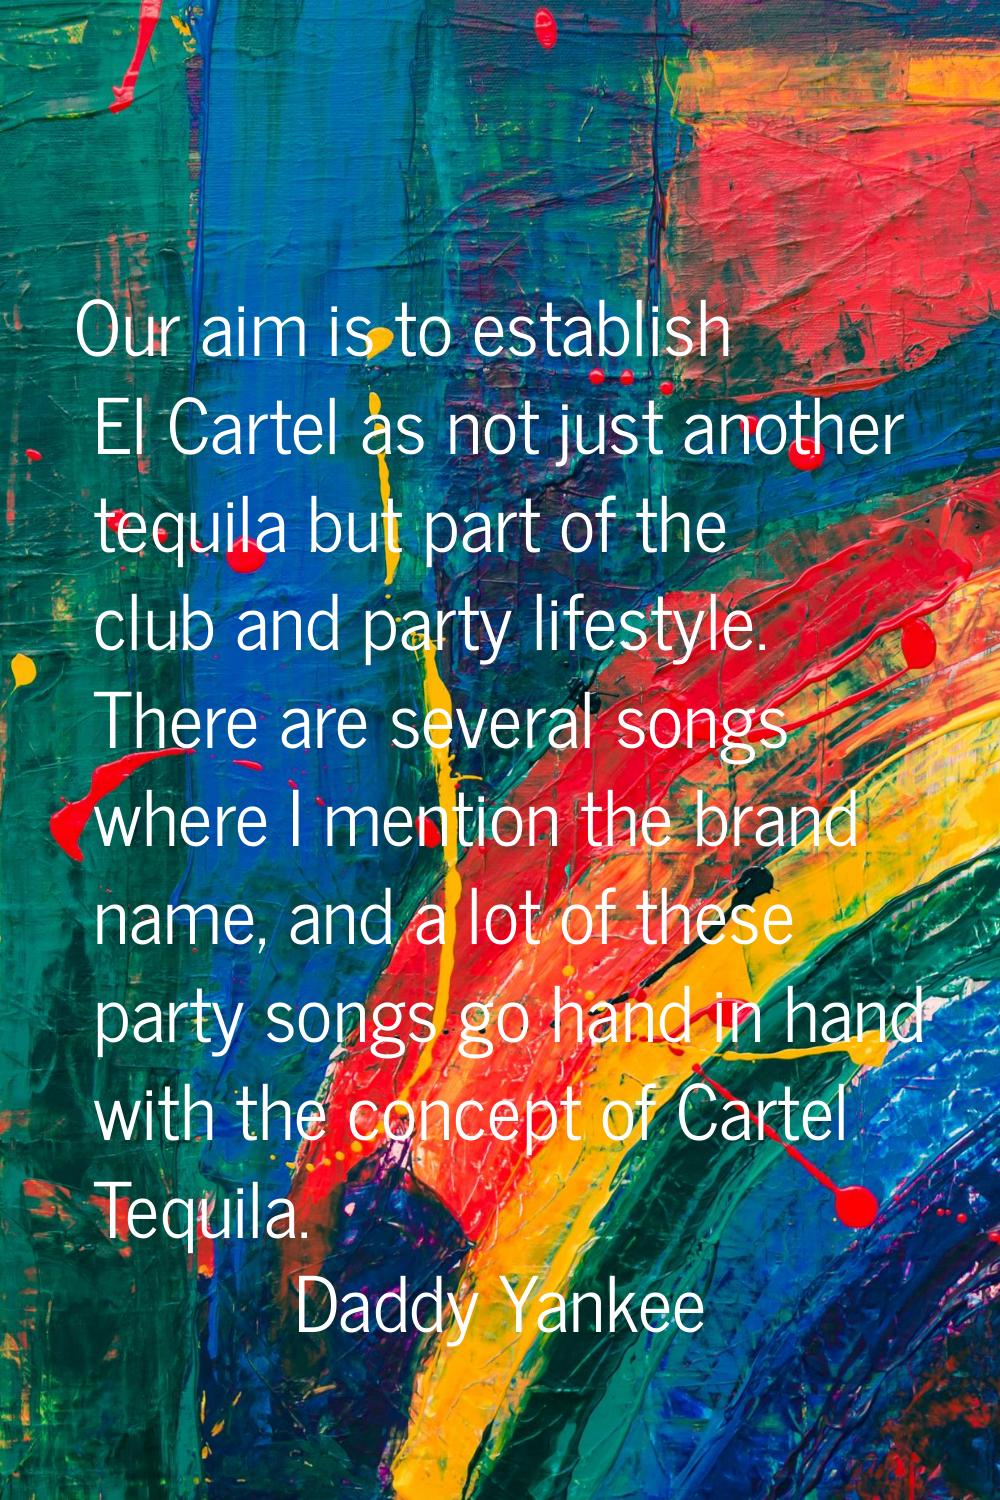 Our aim is to establish El Cartel as not just another tequila but part of the club and party lifest